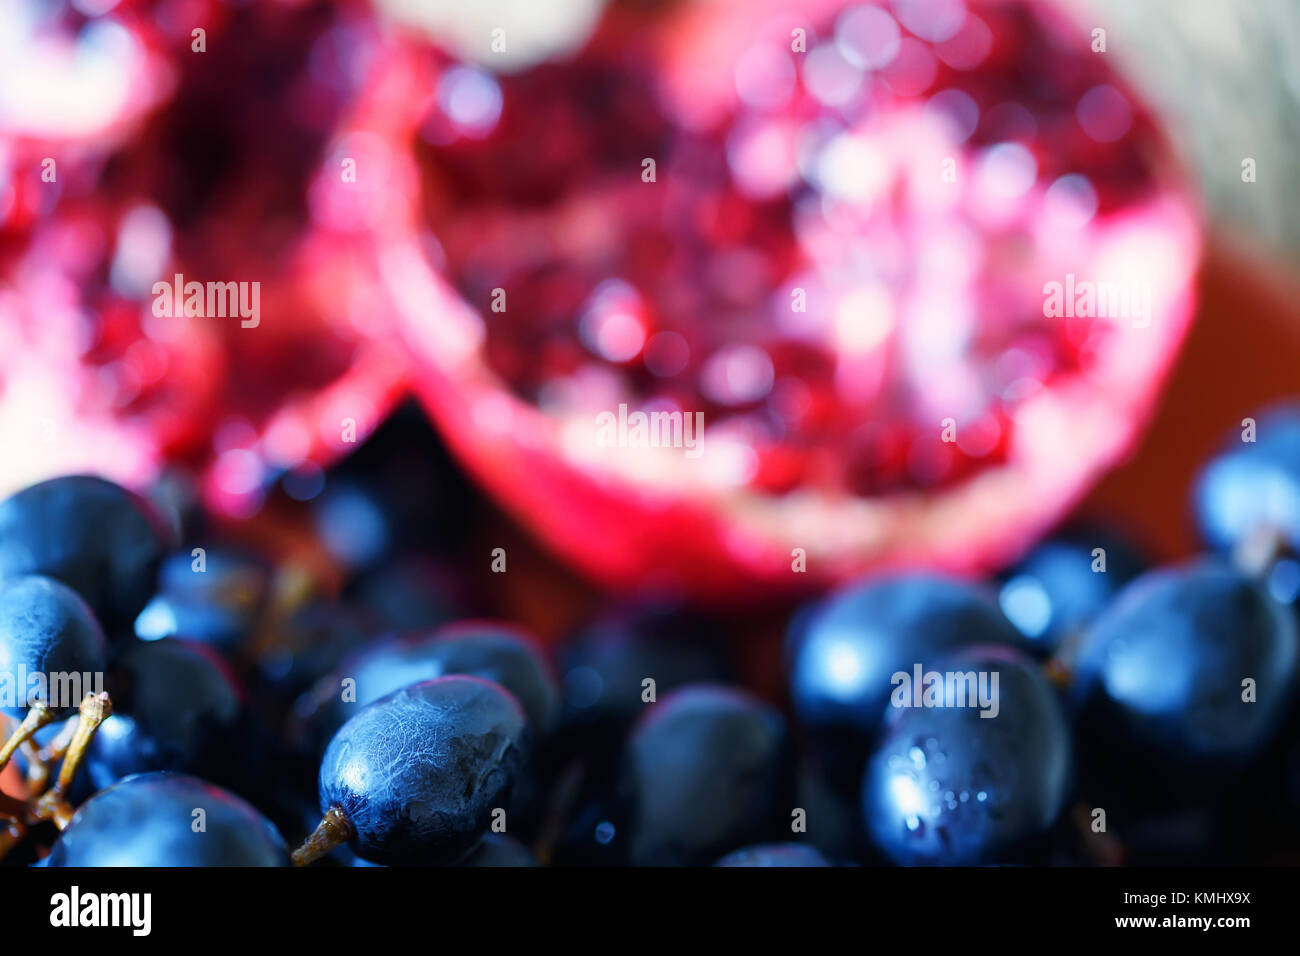 Close-up red wine grapes background Stock Photo